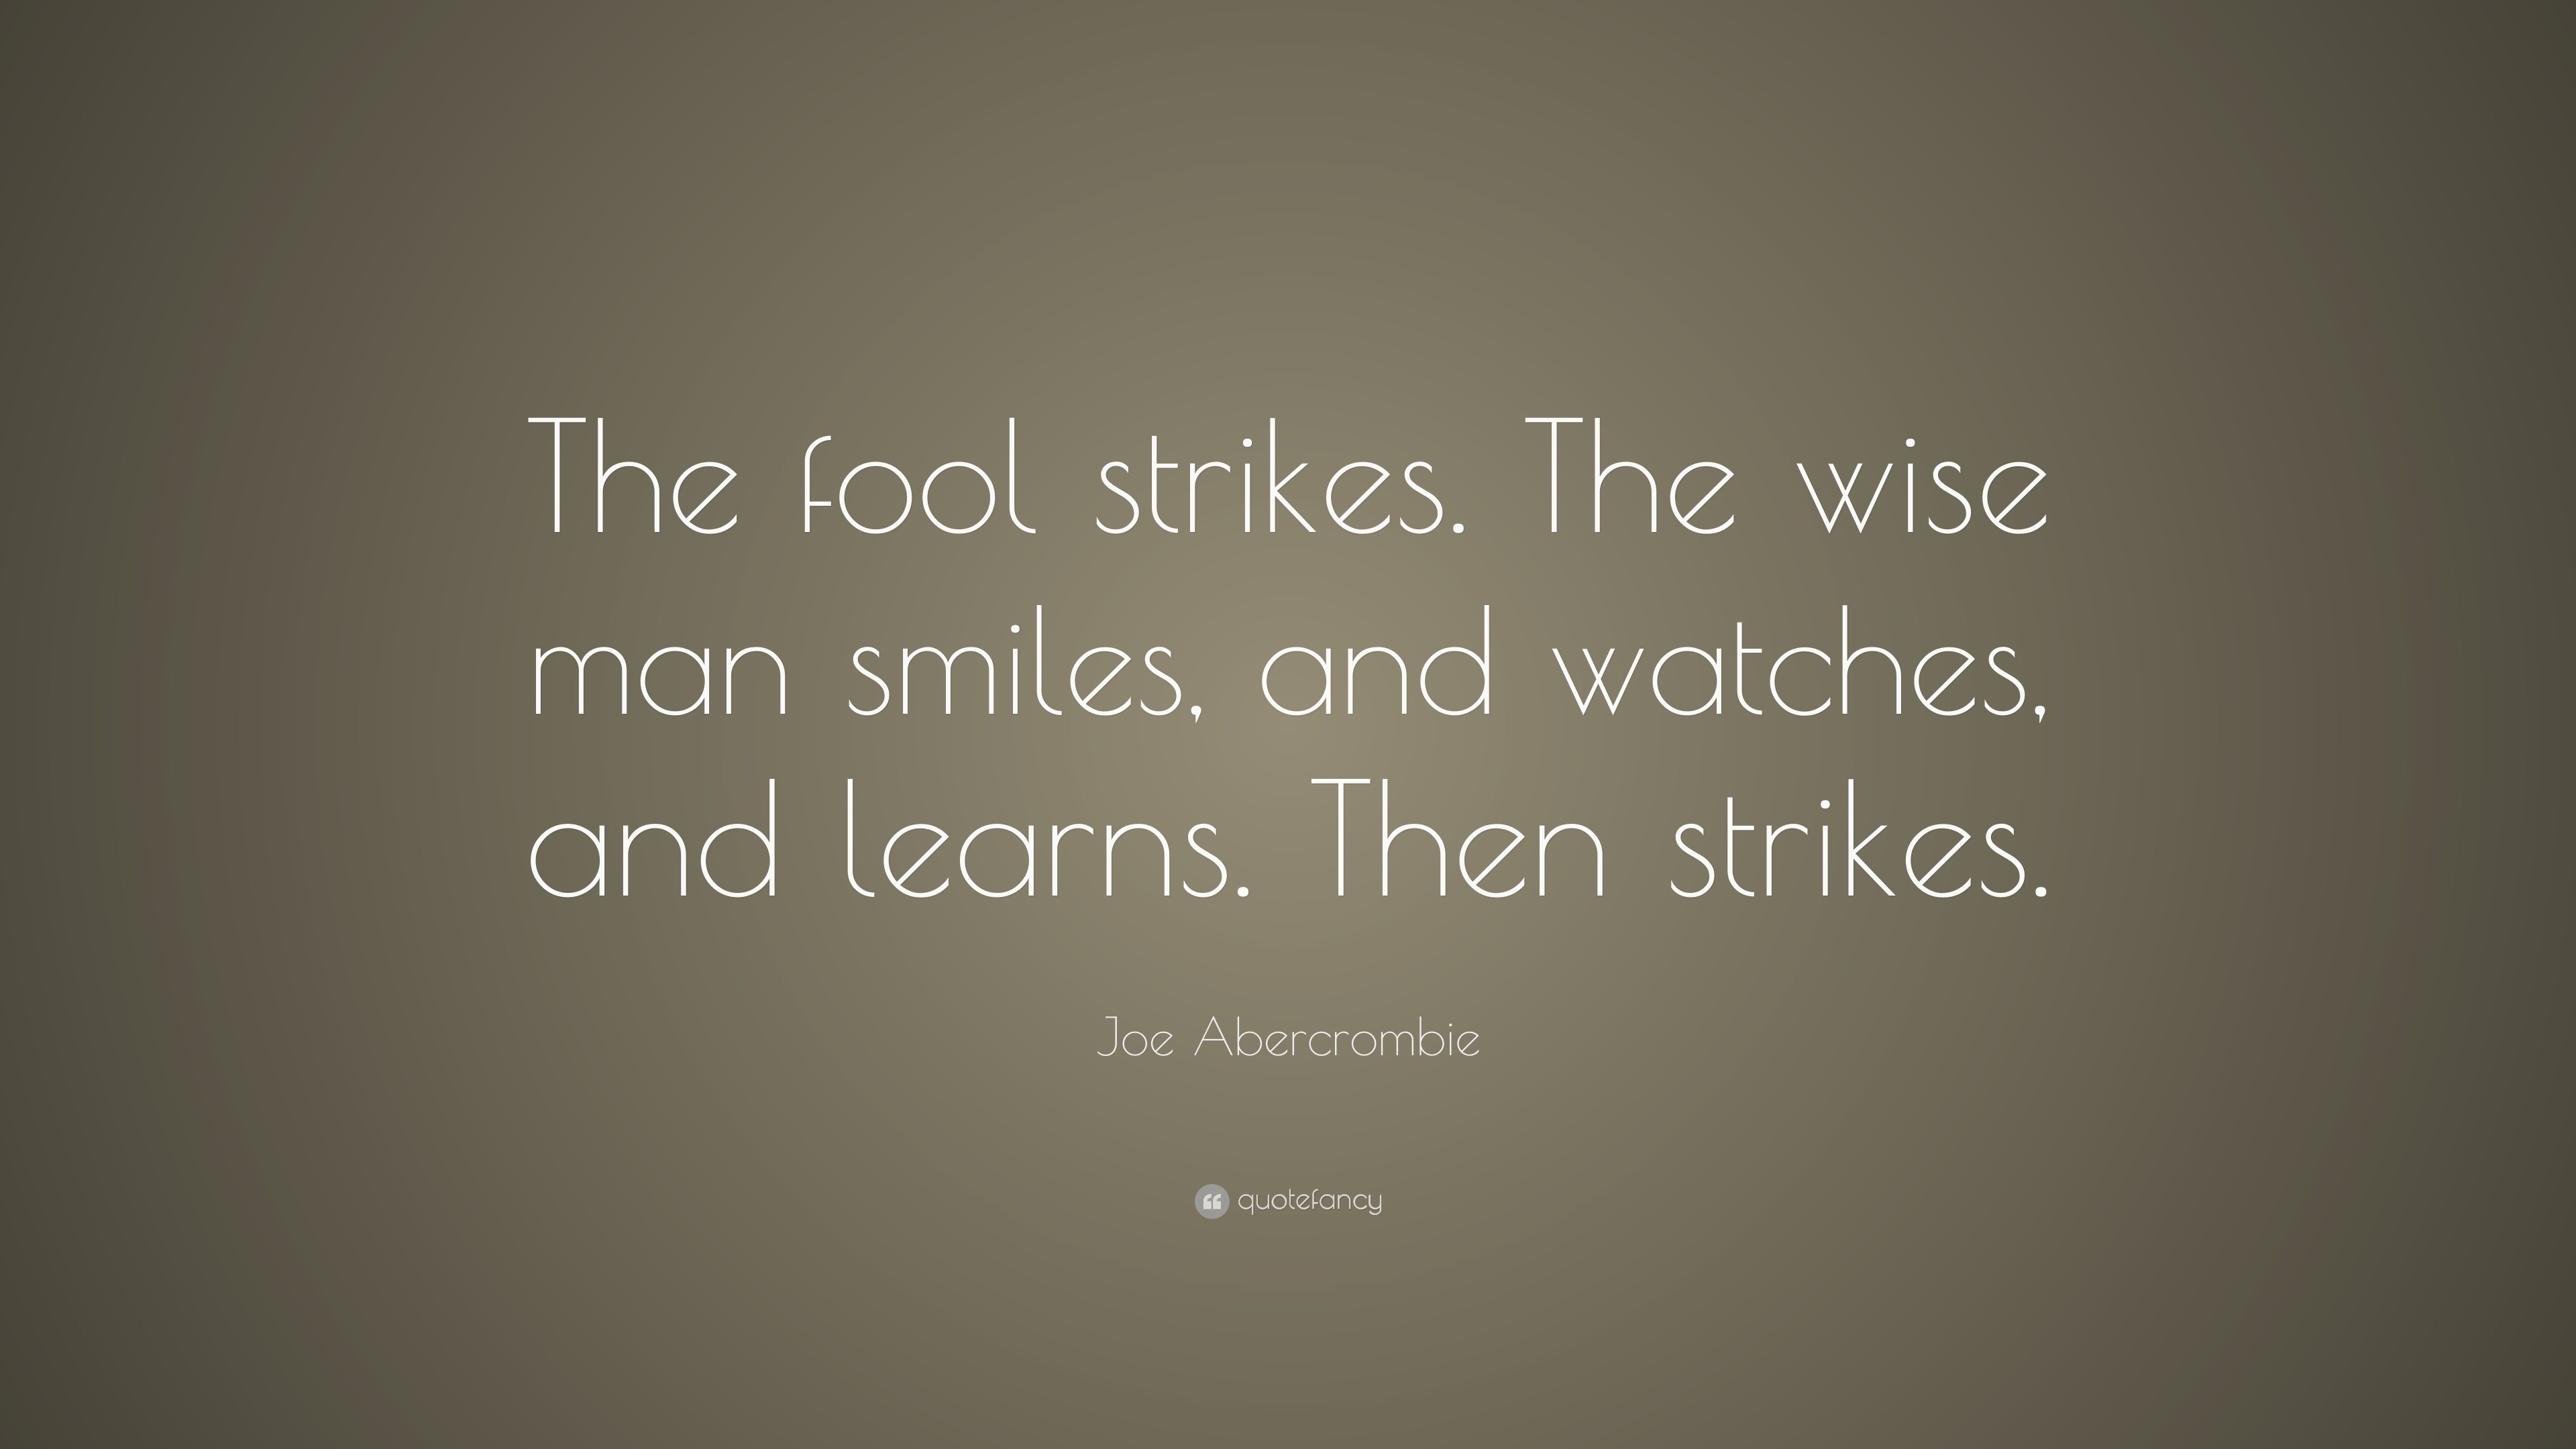 3840x2160 Joe Abercrombie Quote: “The fool strikes. The wise man smiles, and watches